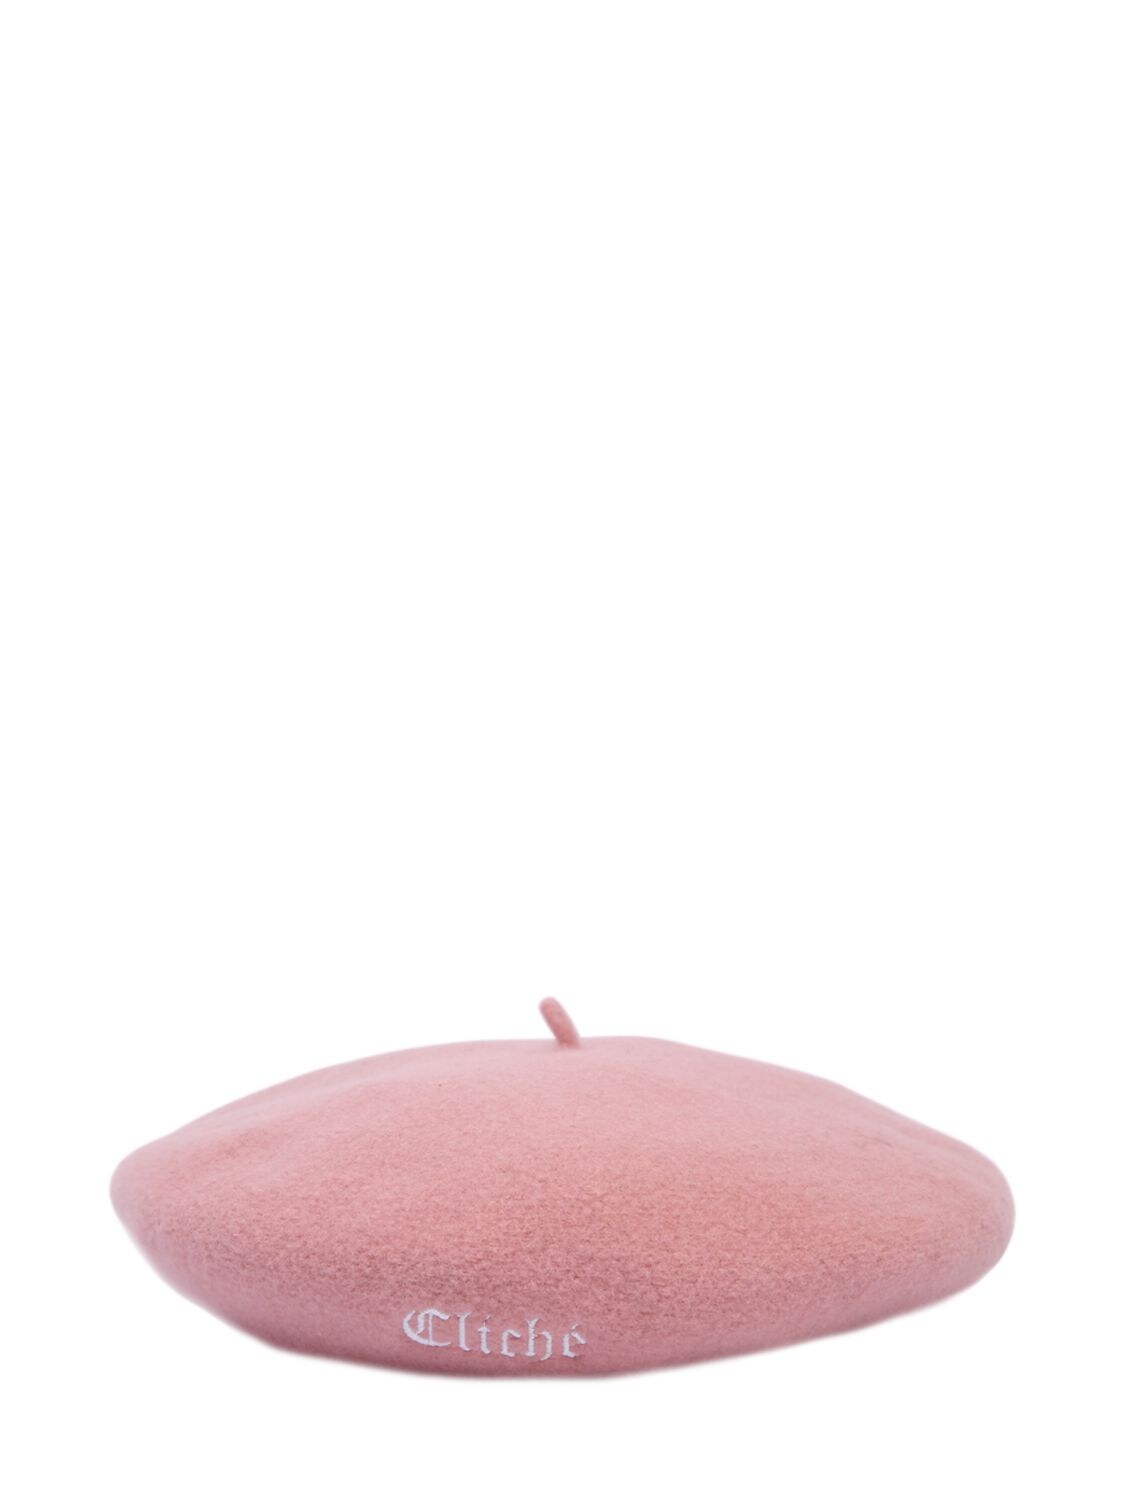 Don Cliché Wool Beret In Pink